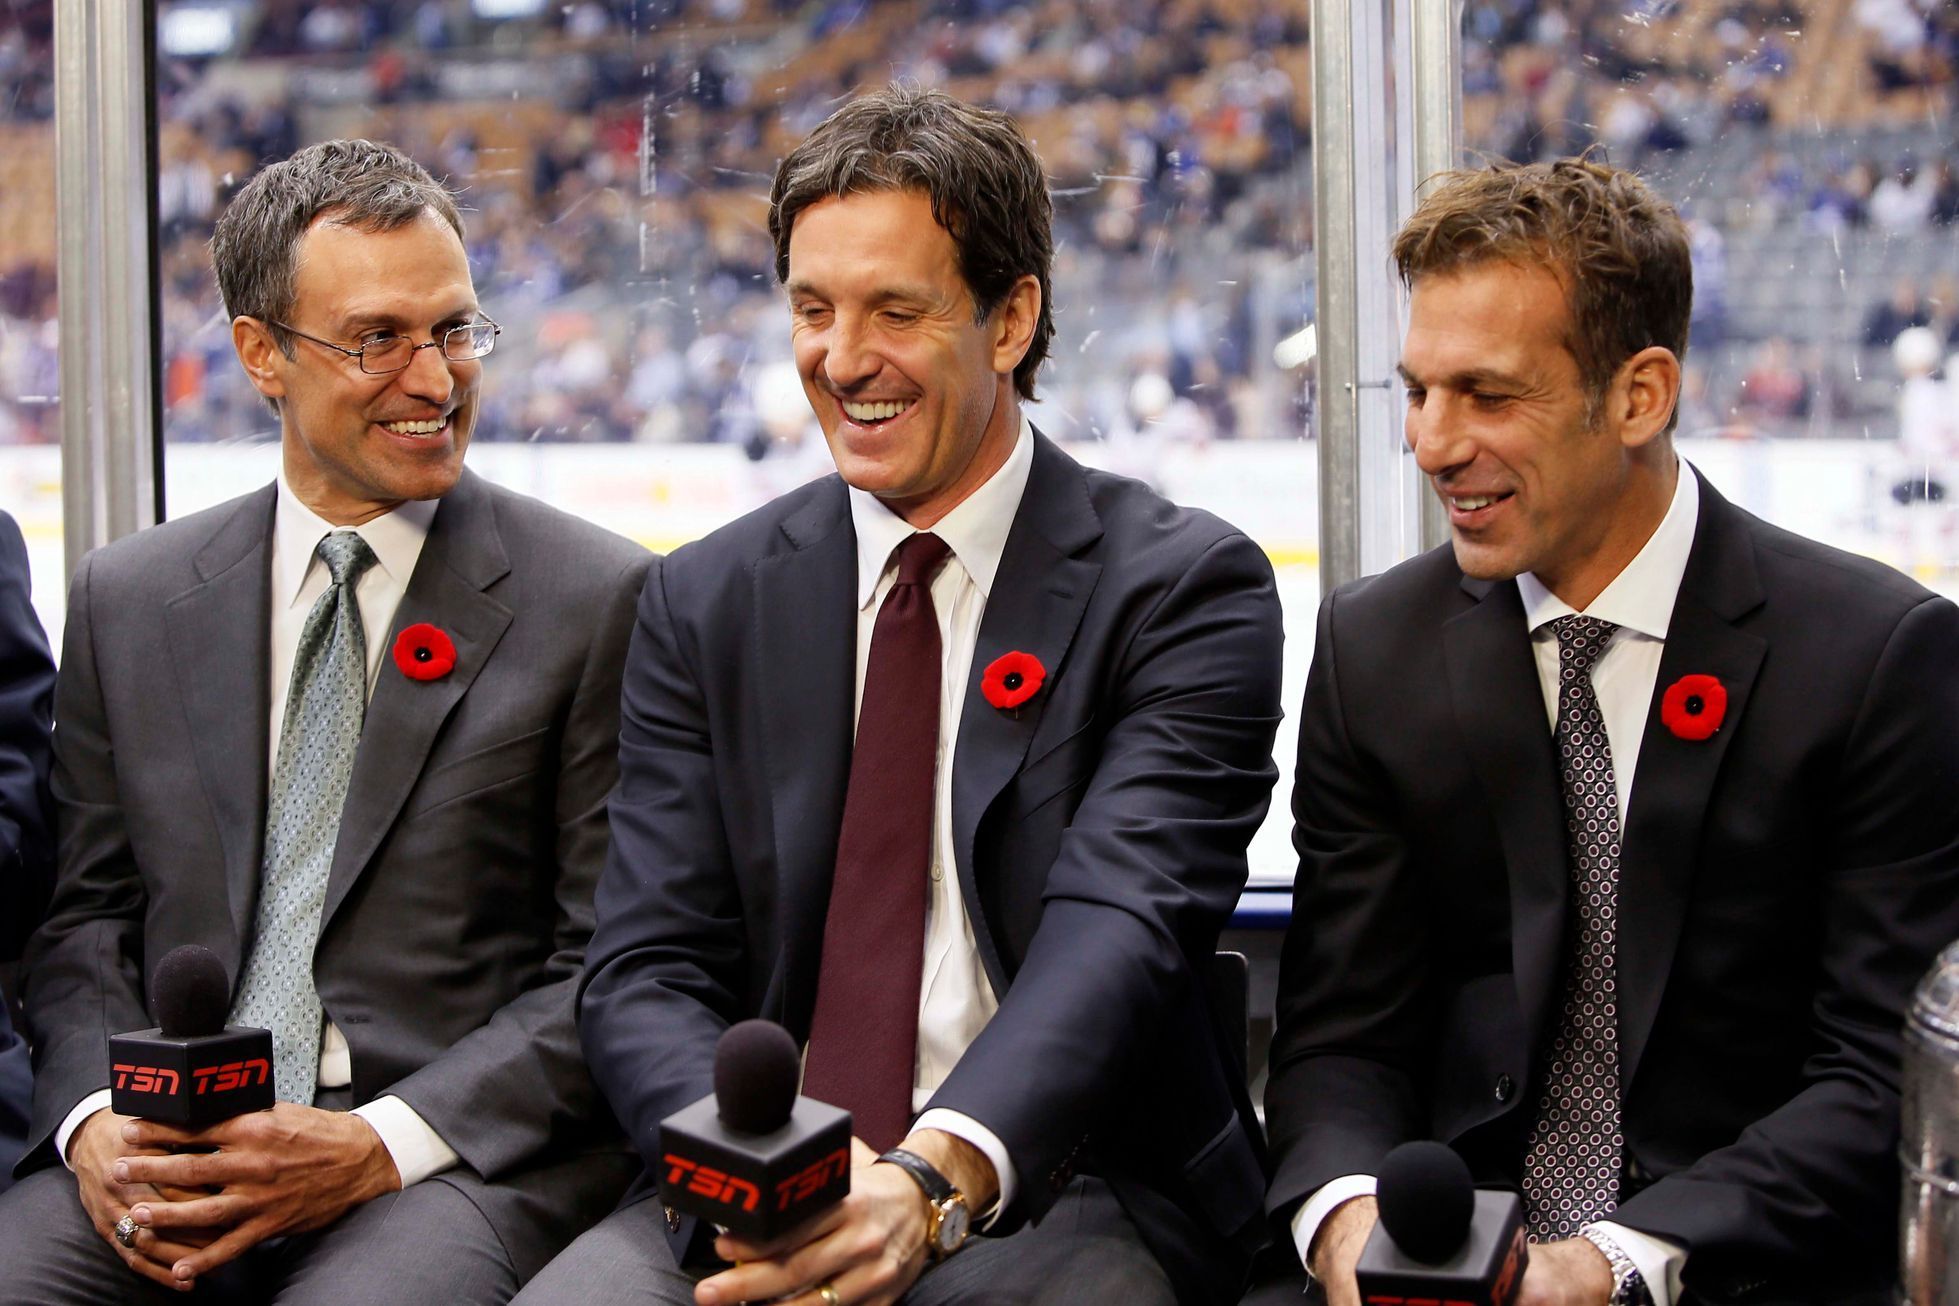 NHL: New Jersey Devils at Toronto Maple Leafs (Niedermayer, Shanahan, Chelios)